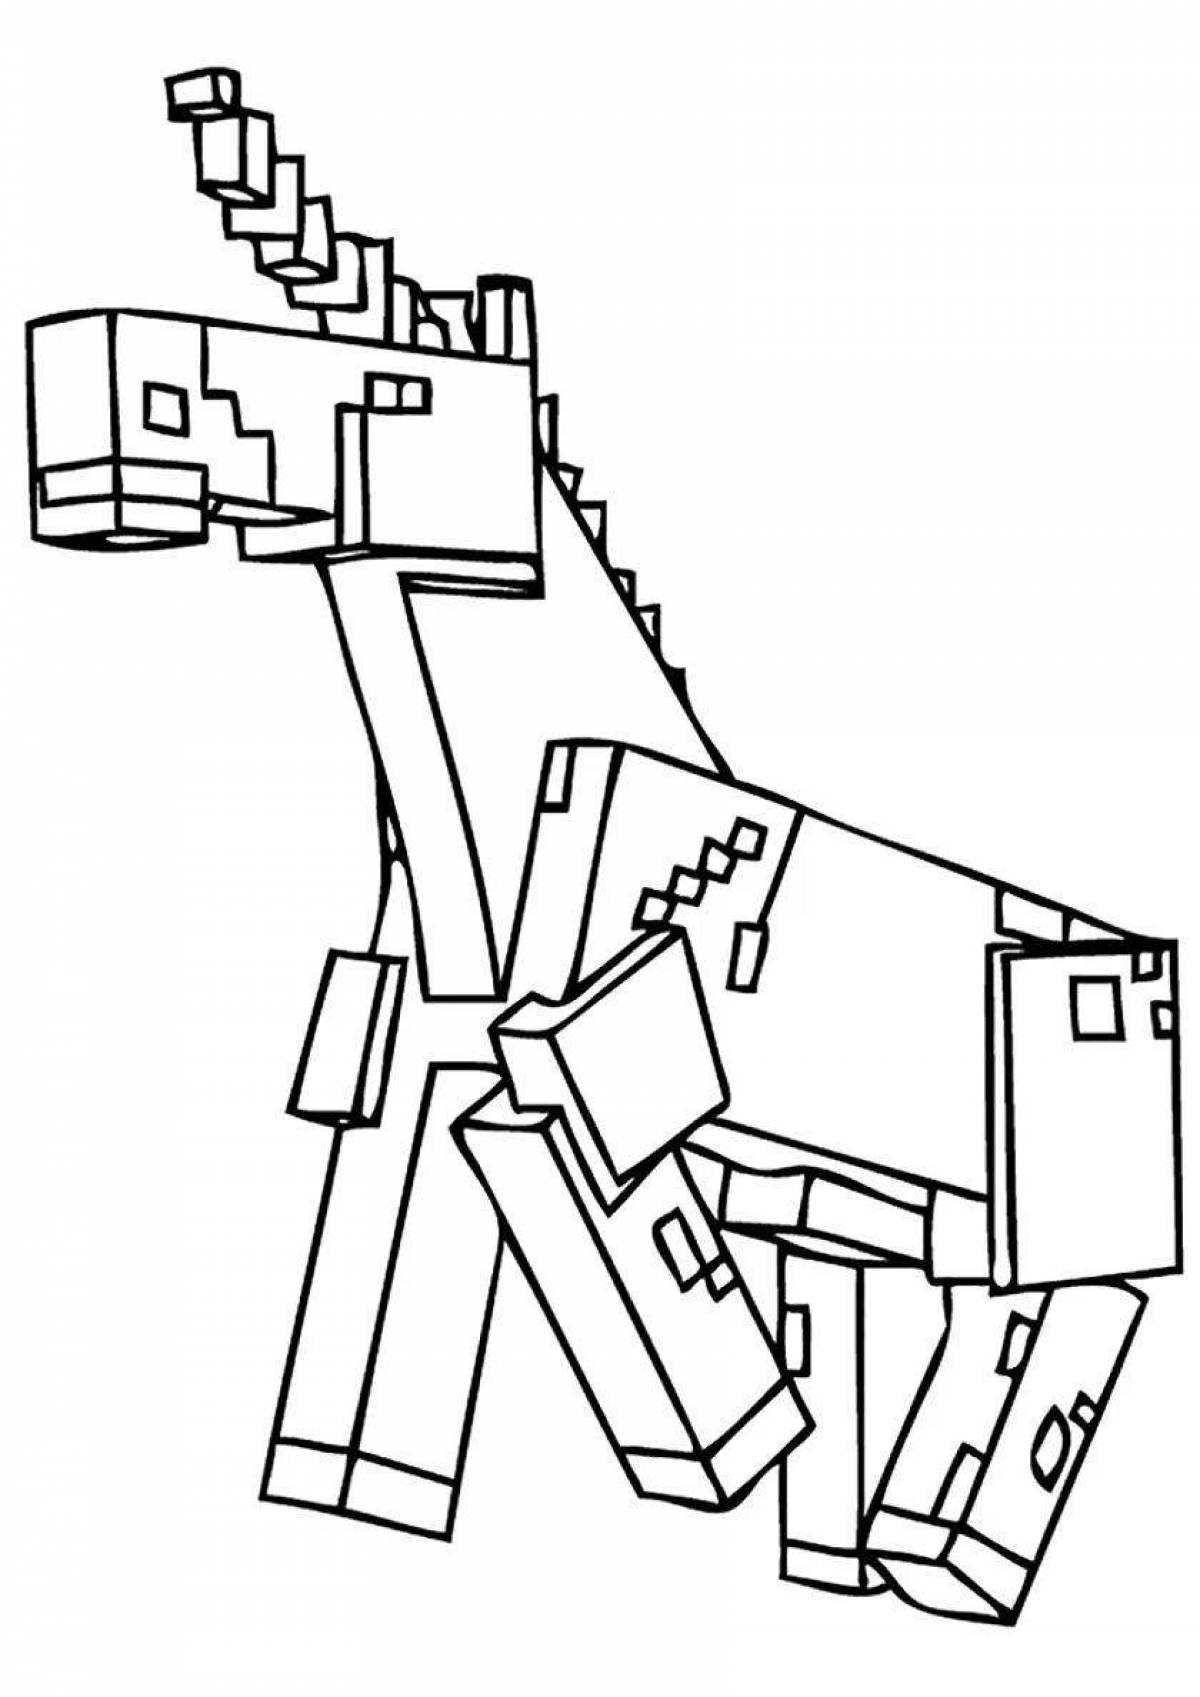 Energetic minecraft pvp coloring page